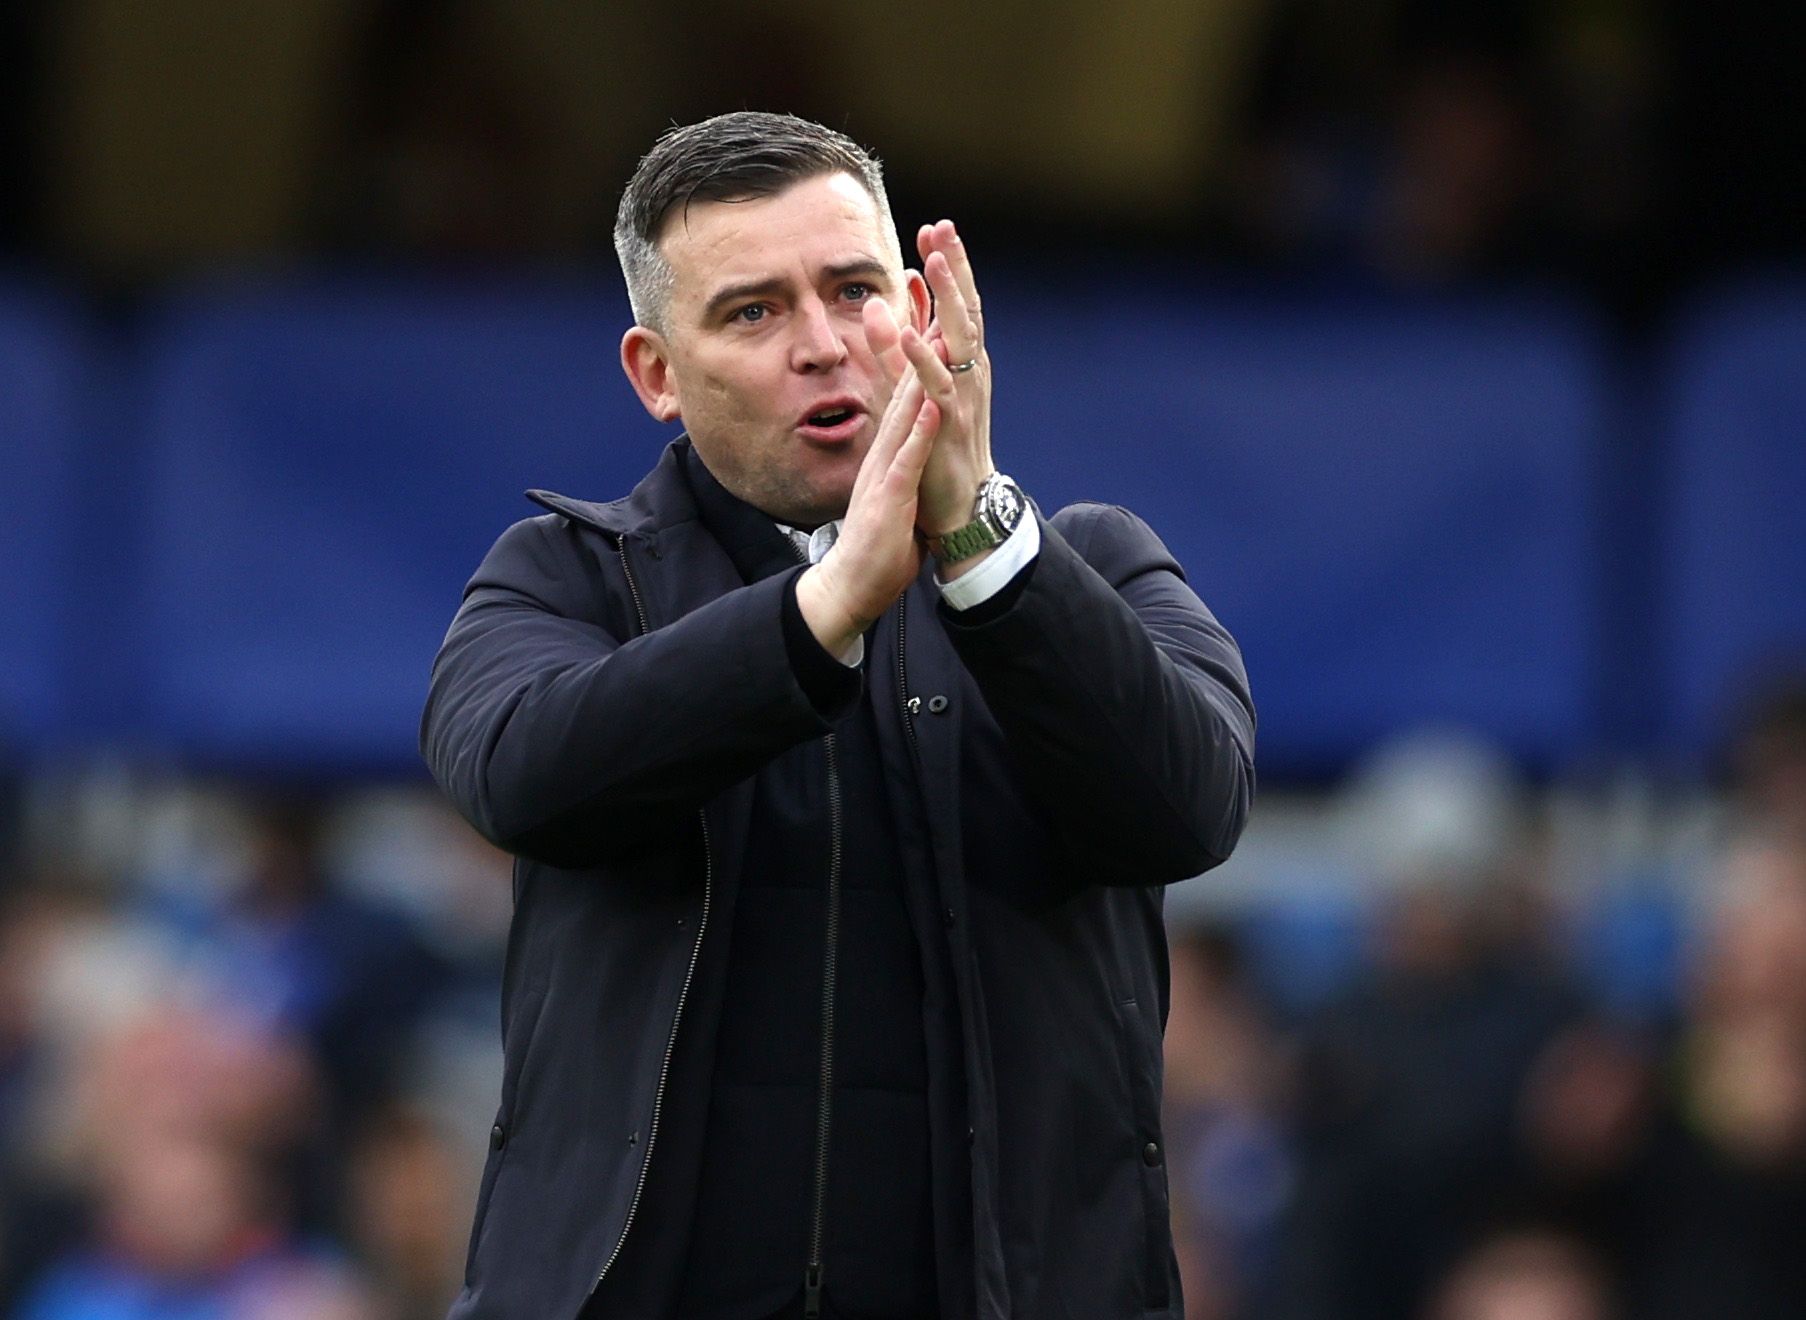 Soccer Football - FA Cup - Fourth Round - Chelsea v Plymouth Argyle - Stamford Bridge, London, Britain - February 5, 2022 Plymouth Argyle manager Steven Schumacher applauds fans after the match Action Images via Reuters/Paul Childs